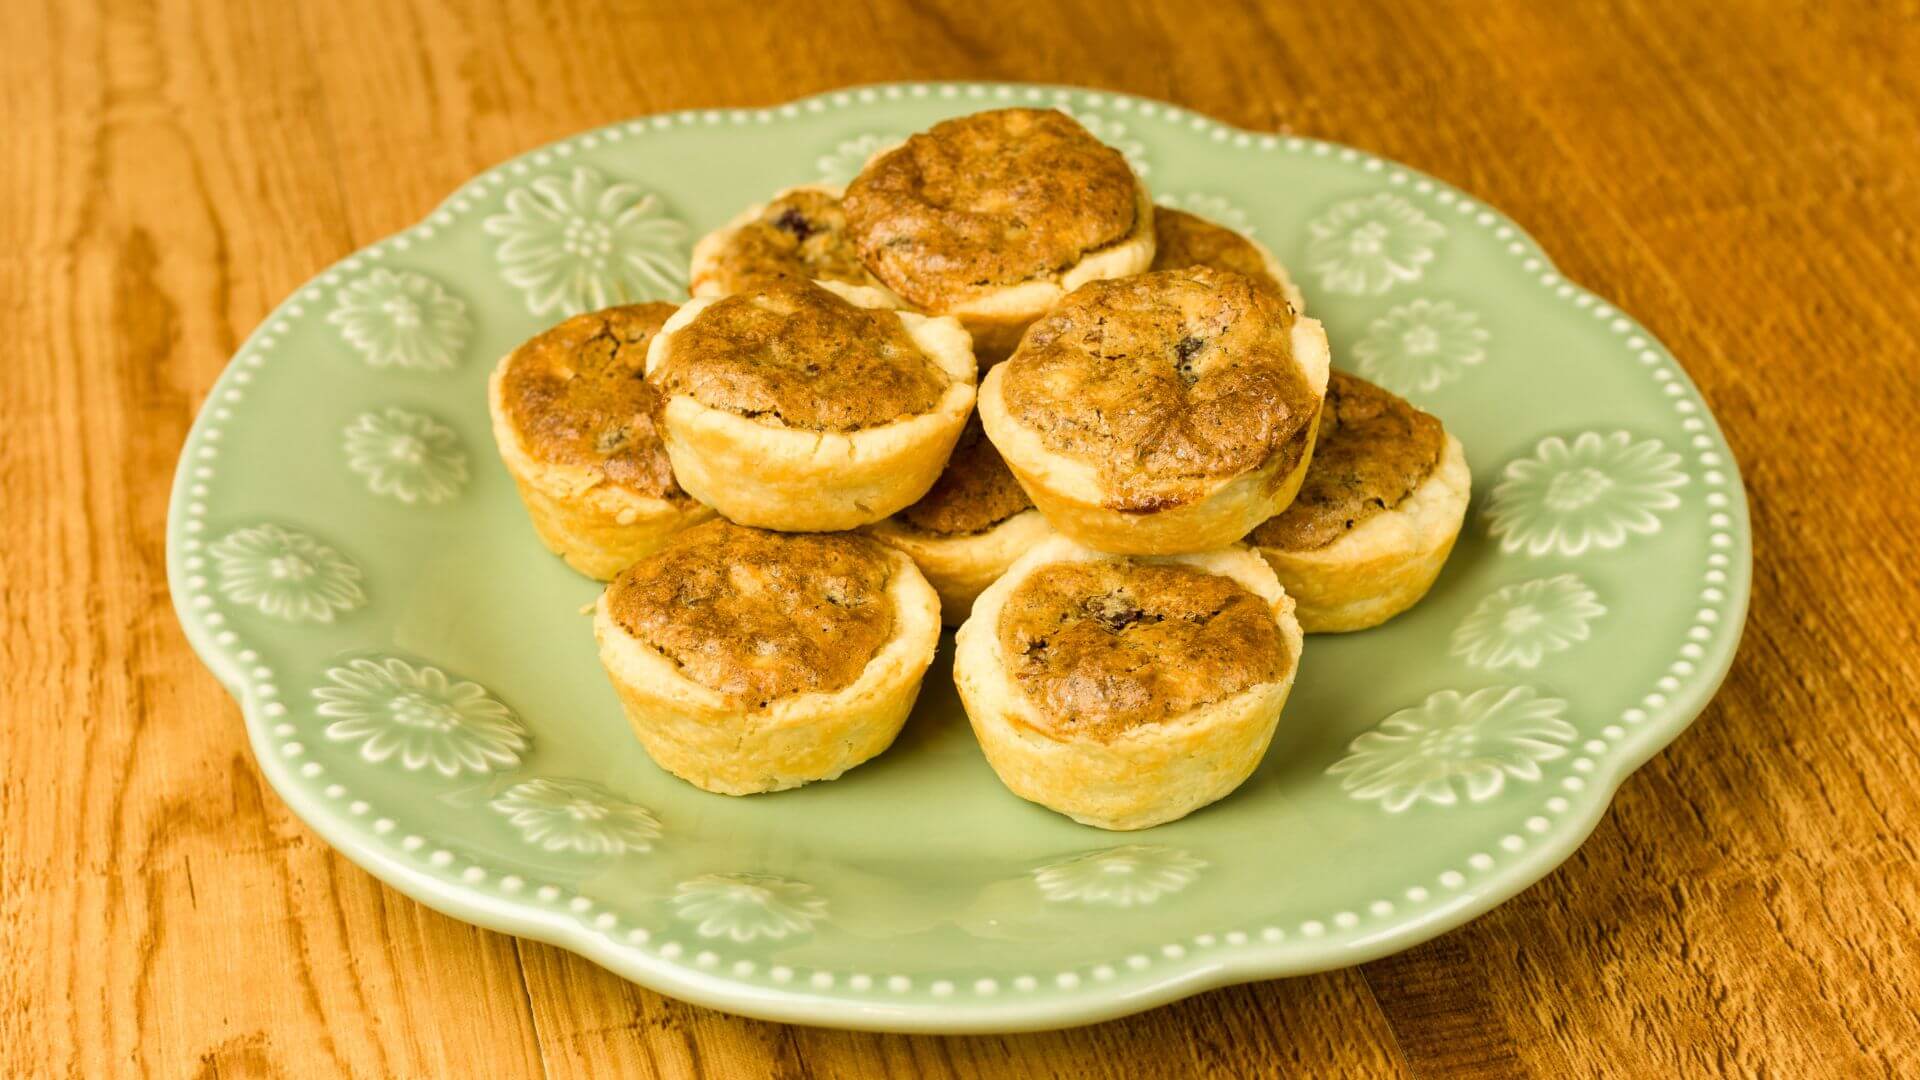 Mini pecan pies on a light green plate on a wood table.